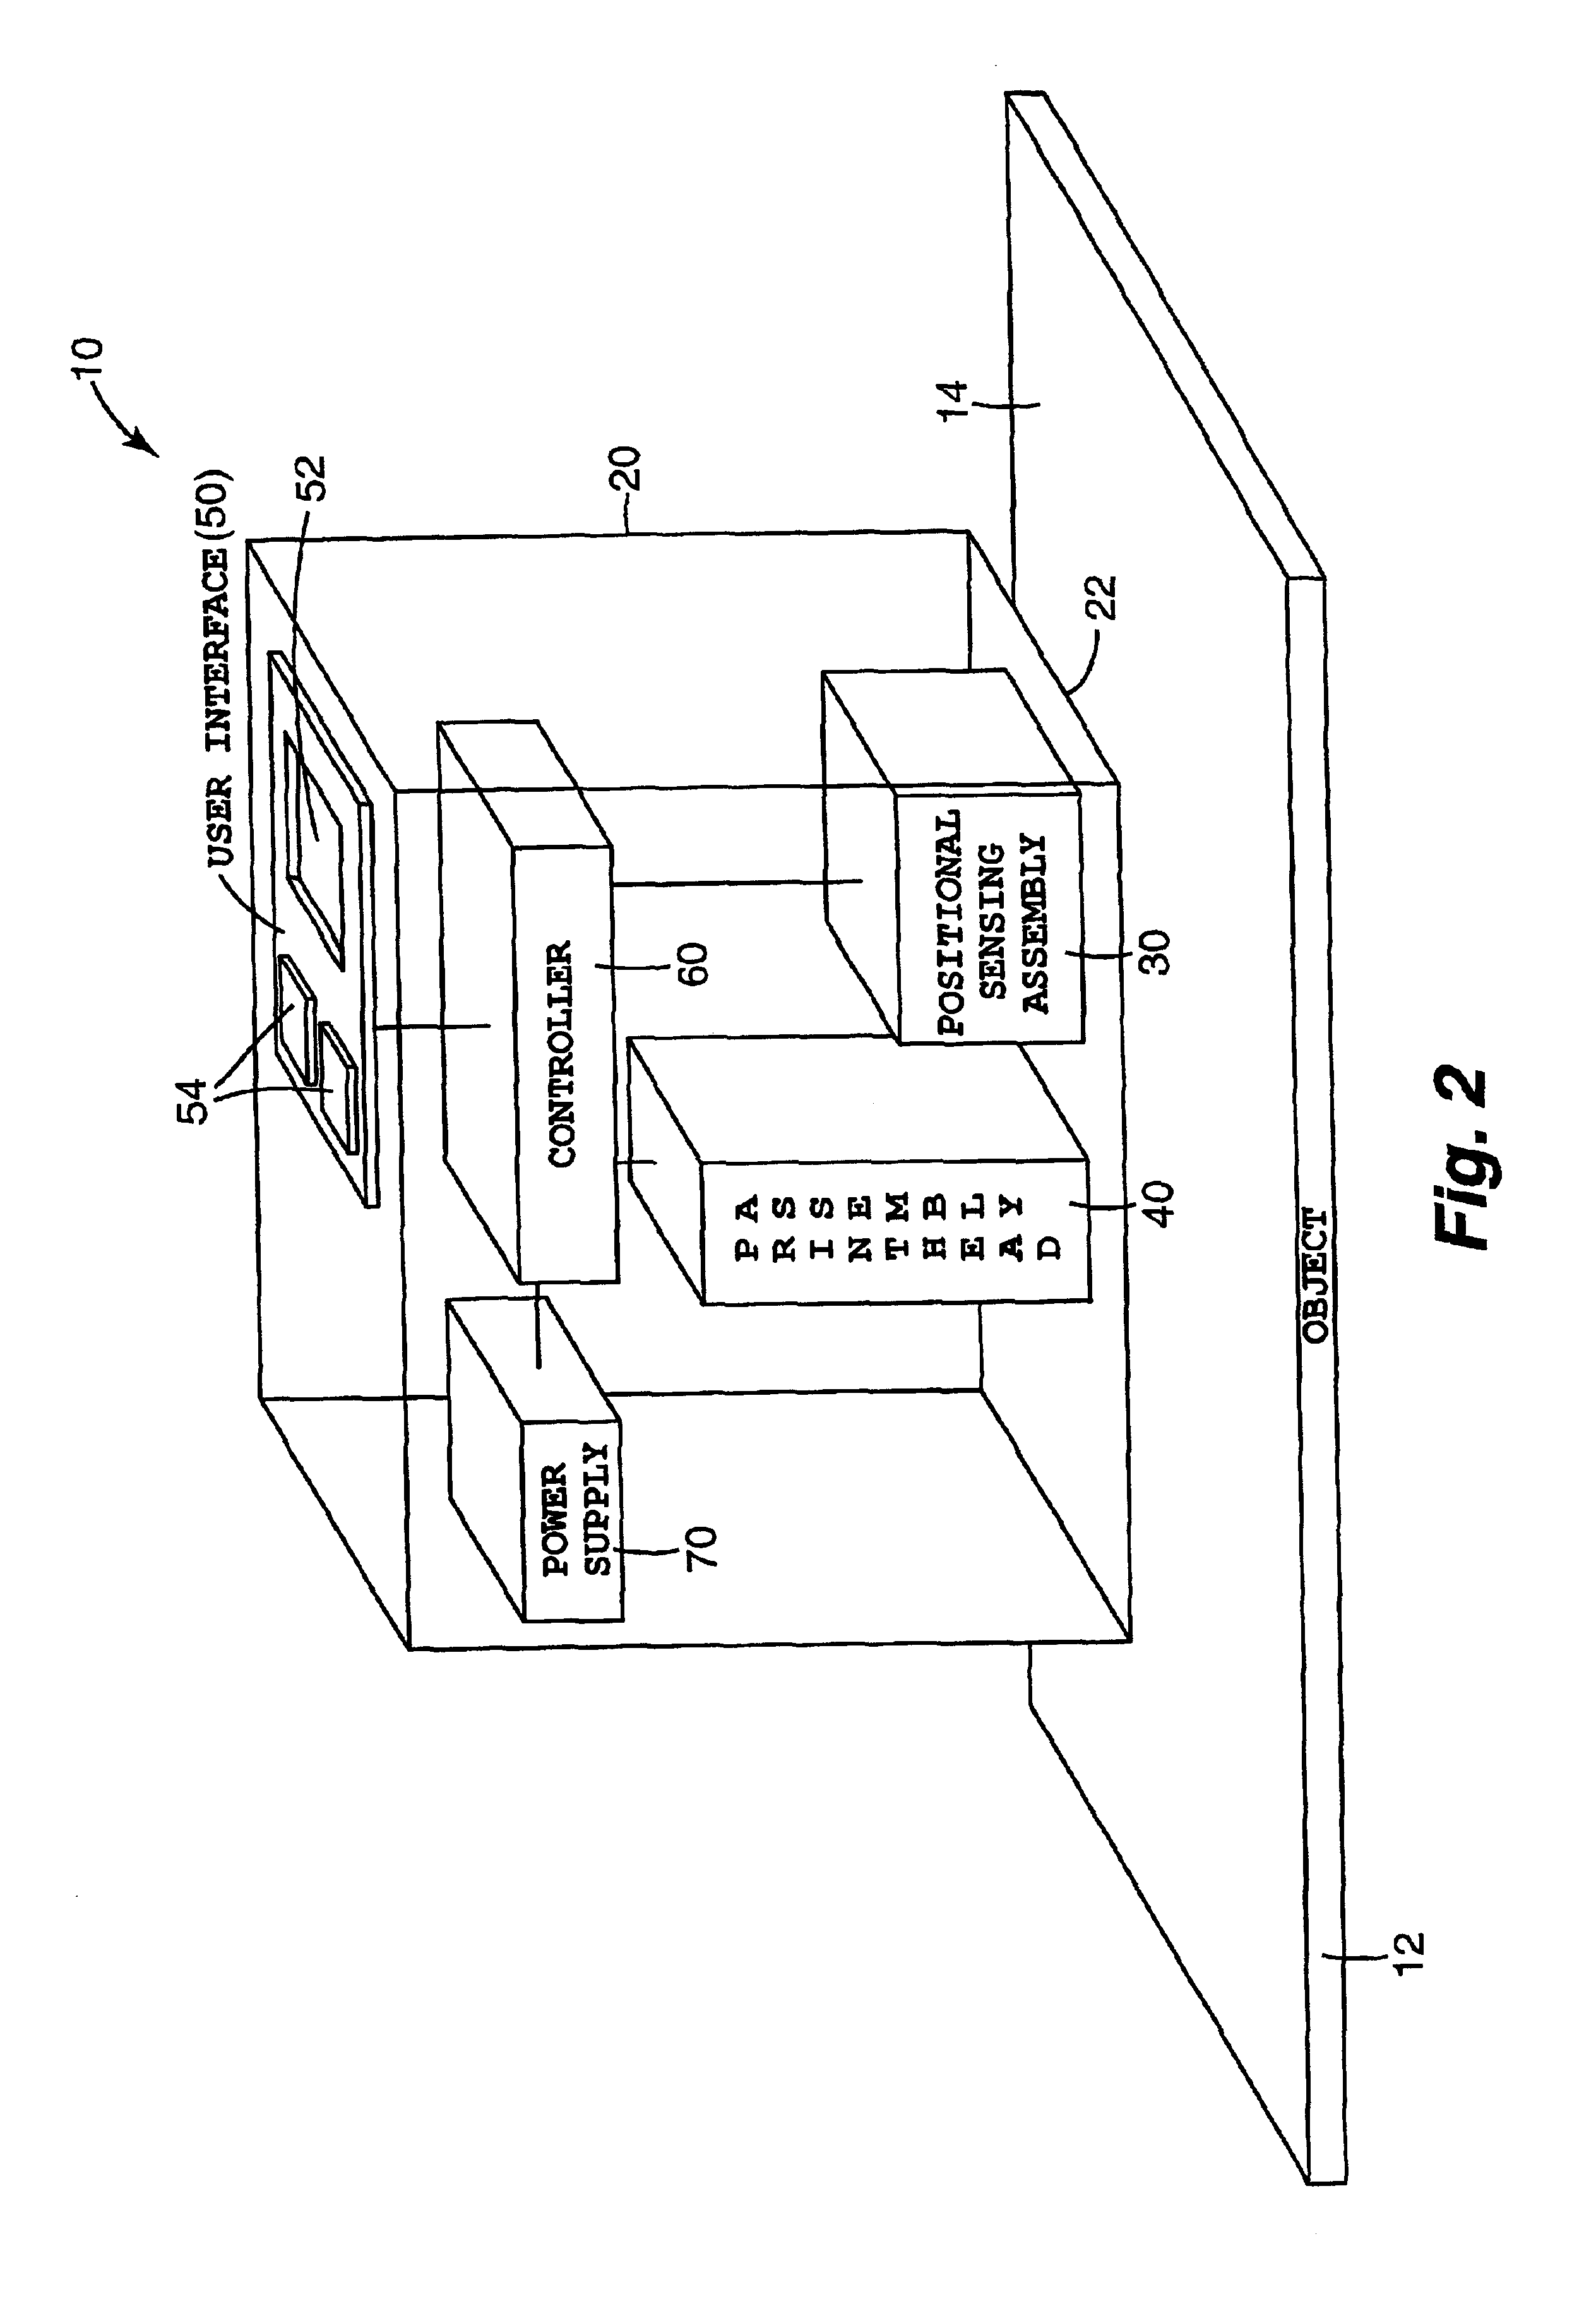 Measurement and marking device